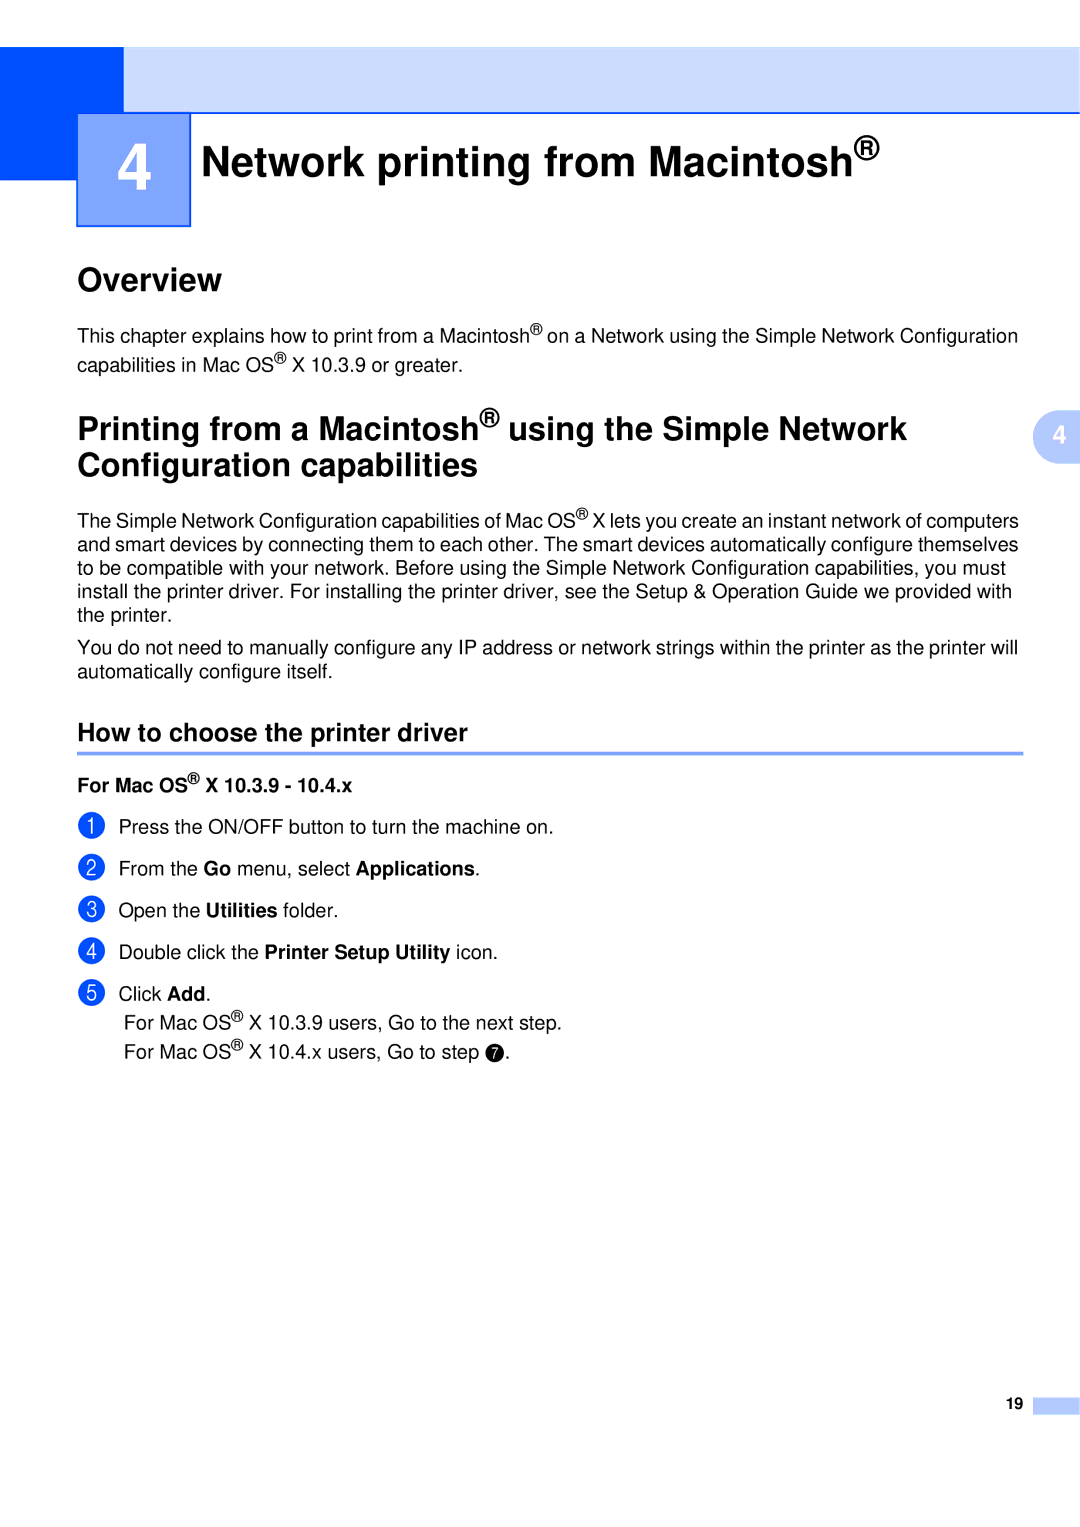 Brother QL-580N manual Network printing from Macintosh, How to choose the printer driver, For Mac OS X 10.3.9 